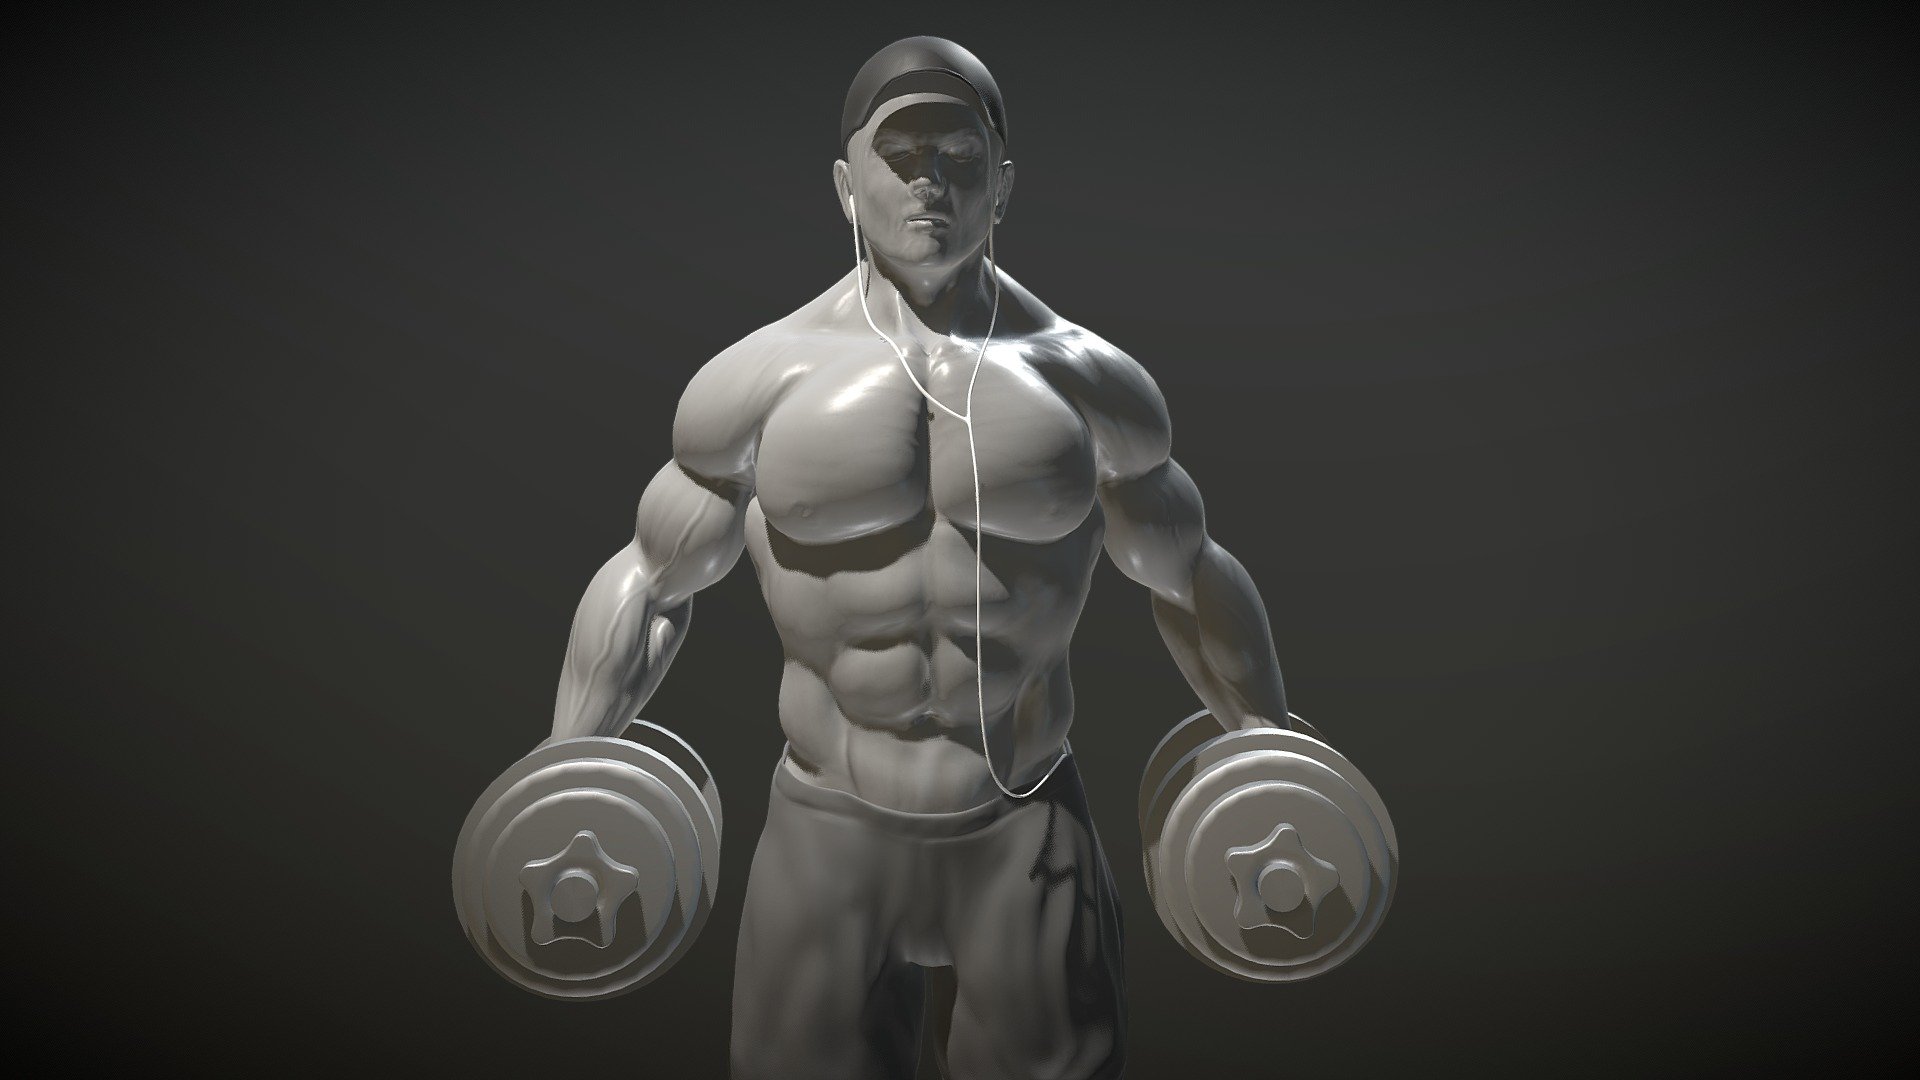 Body Builder Download file contains ZBrush 2018 file with all subtools and subdivisions 3d model